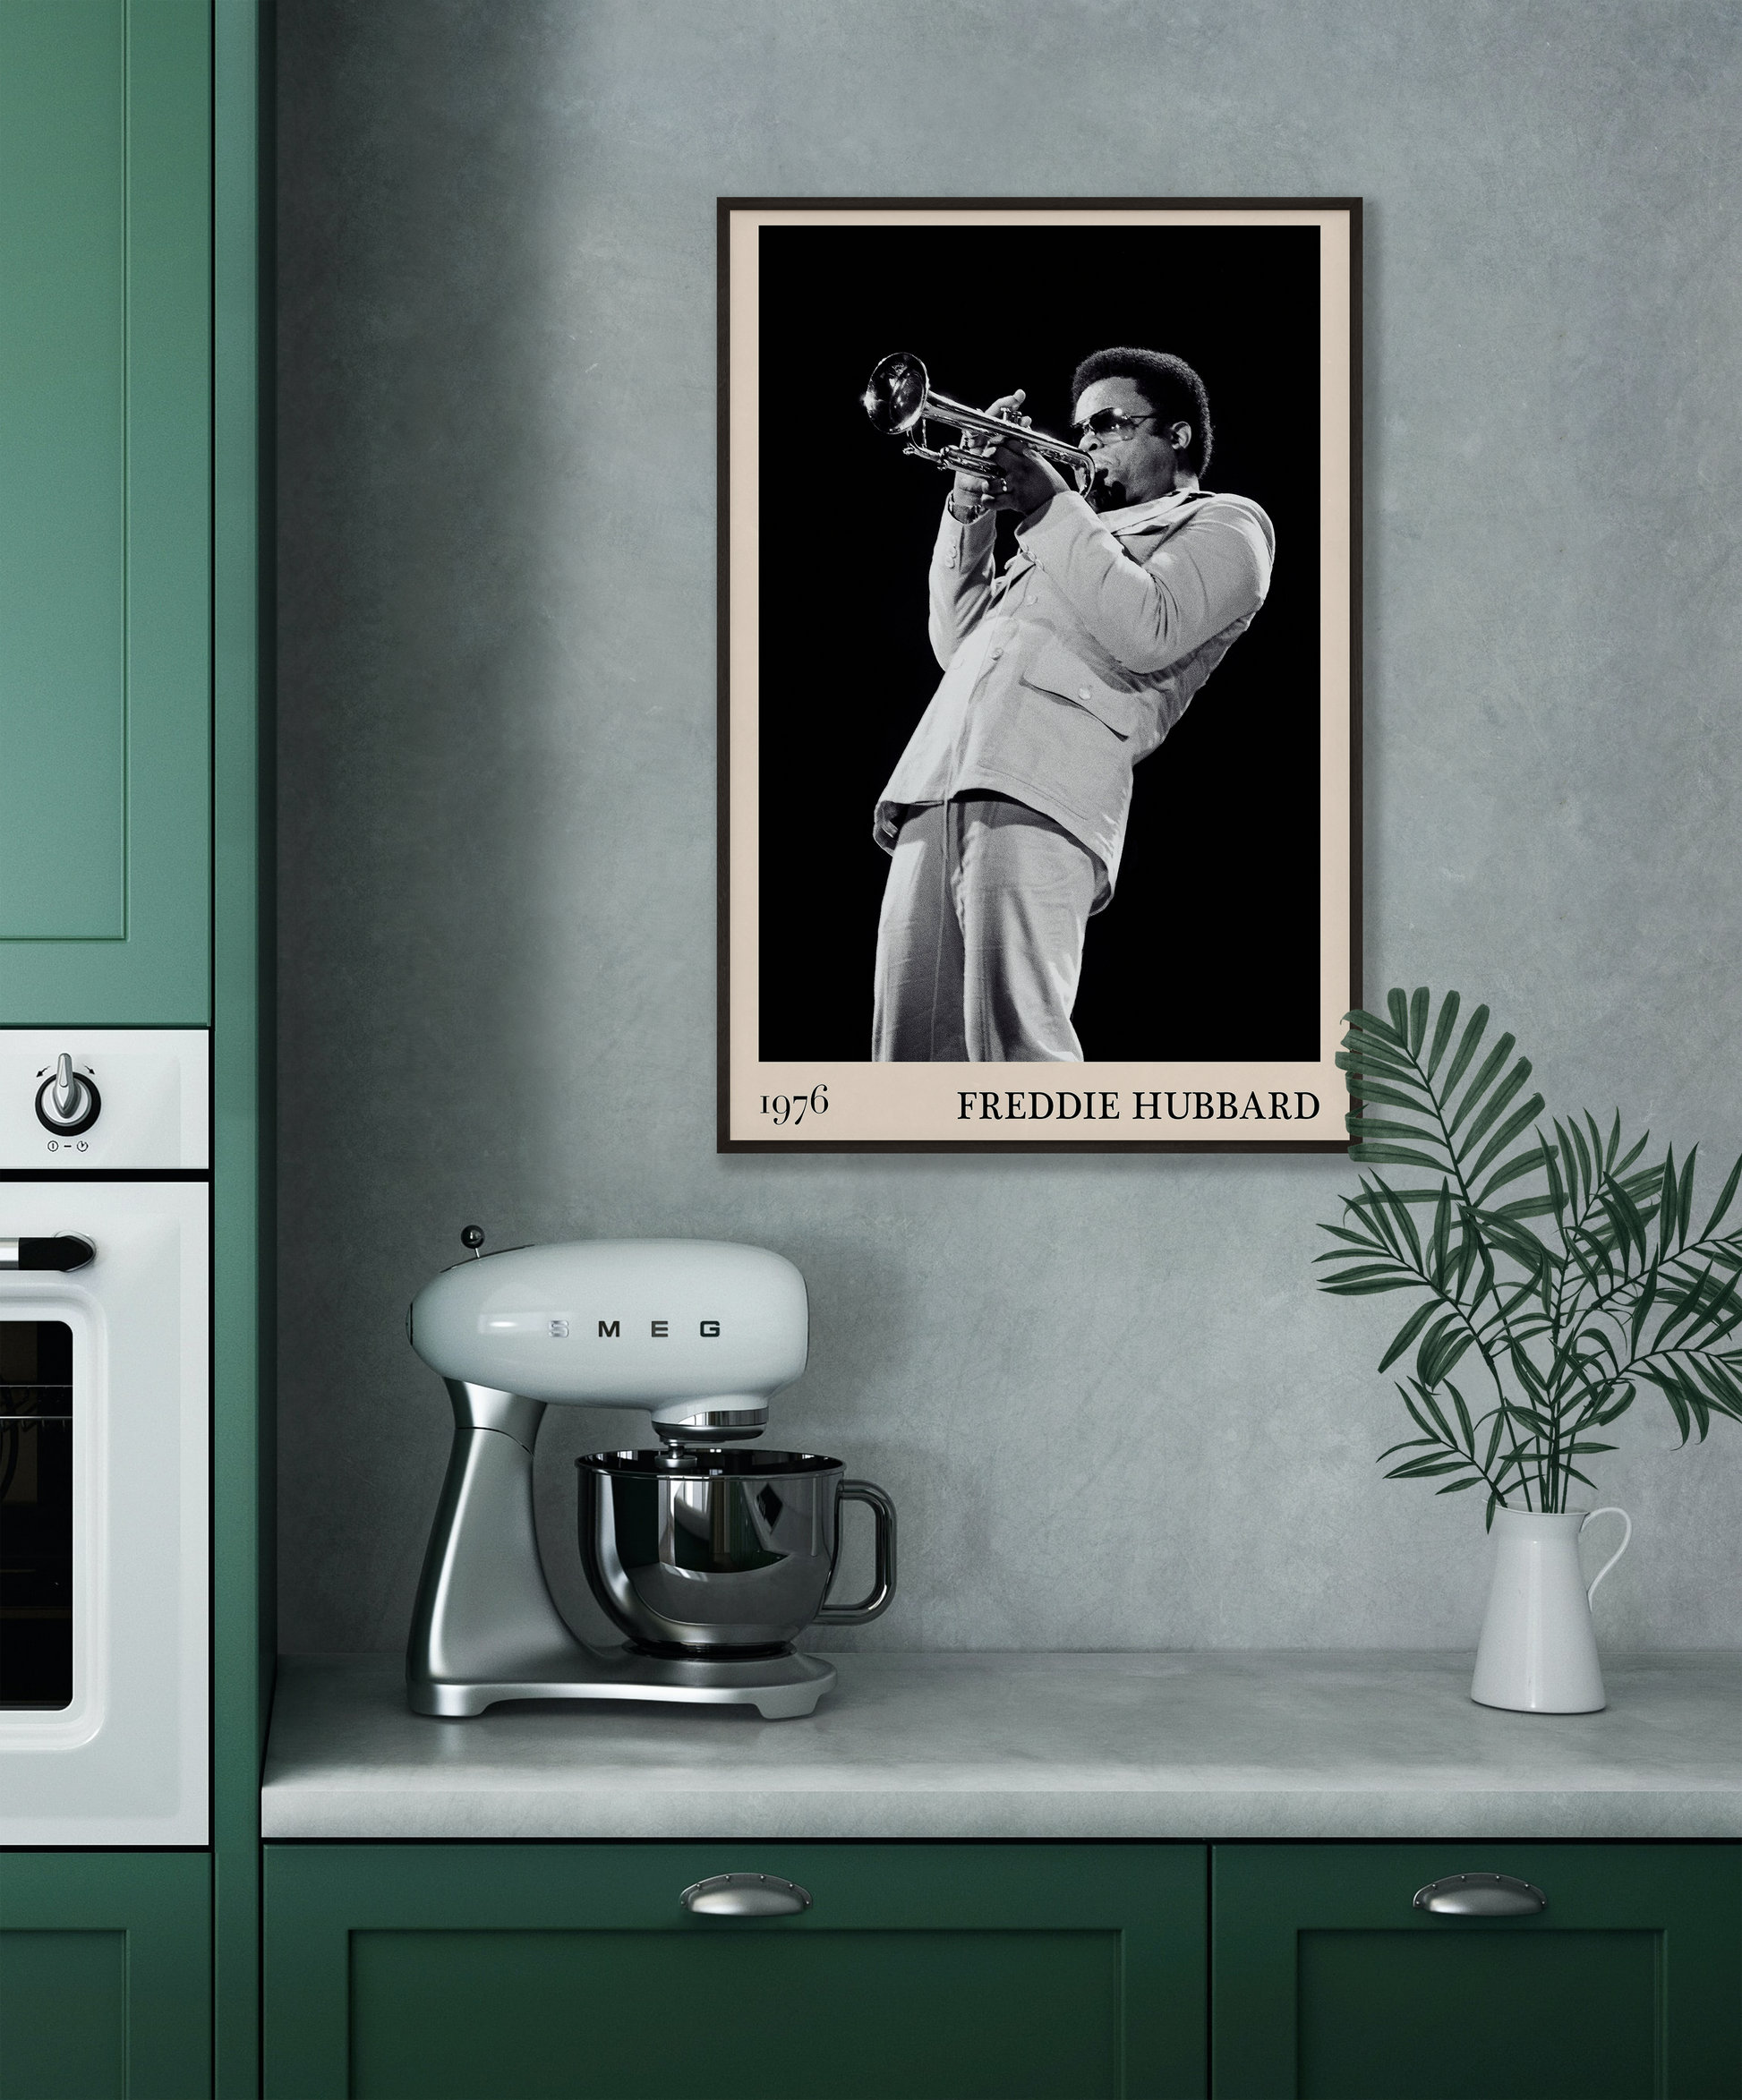 1976 photograph of Freddie Hubbard taken by Thomas Marcello. Picture crafted into a cool black framed jazz print, with an off-white border. Poster is hanging on a grey kitchen wall.